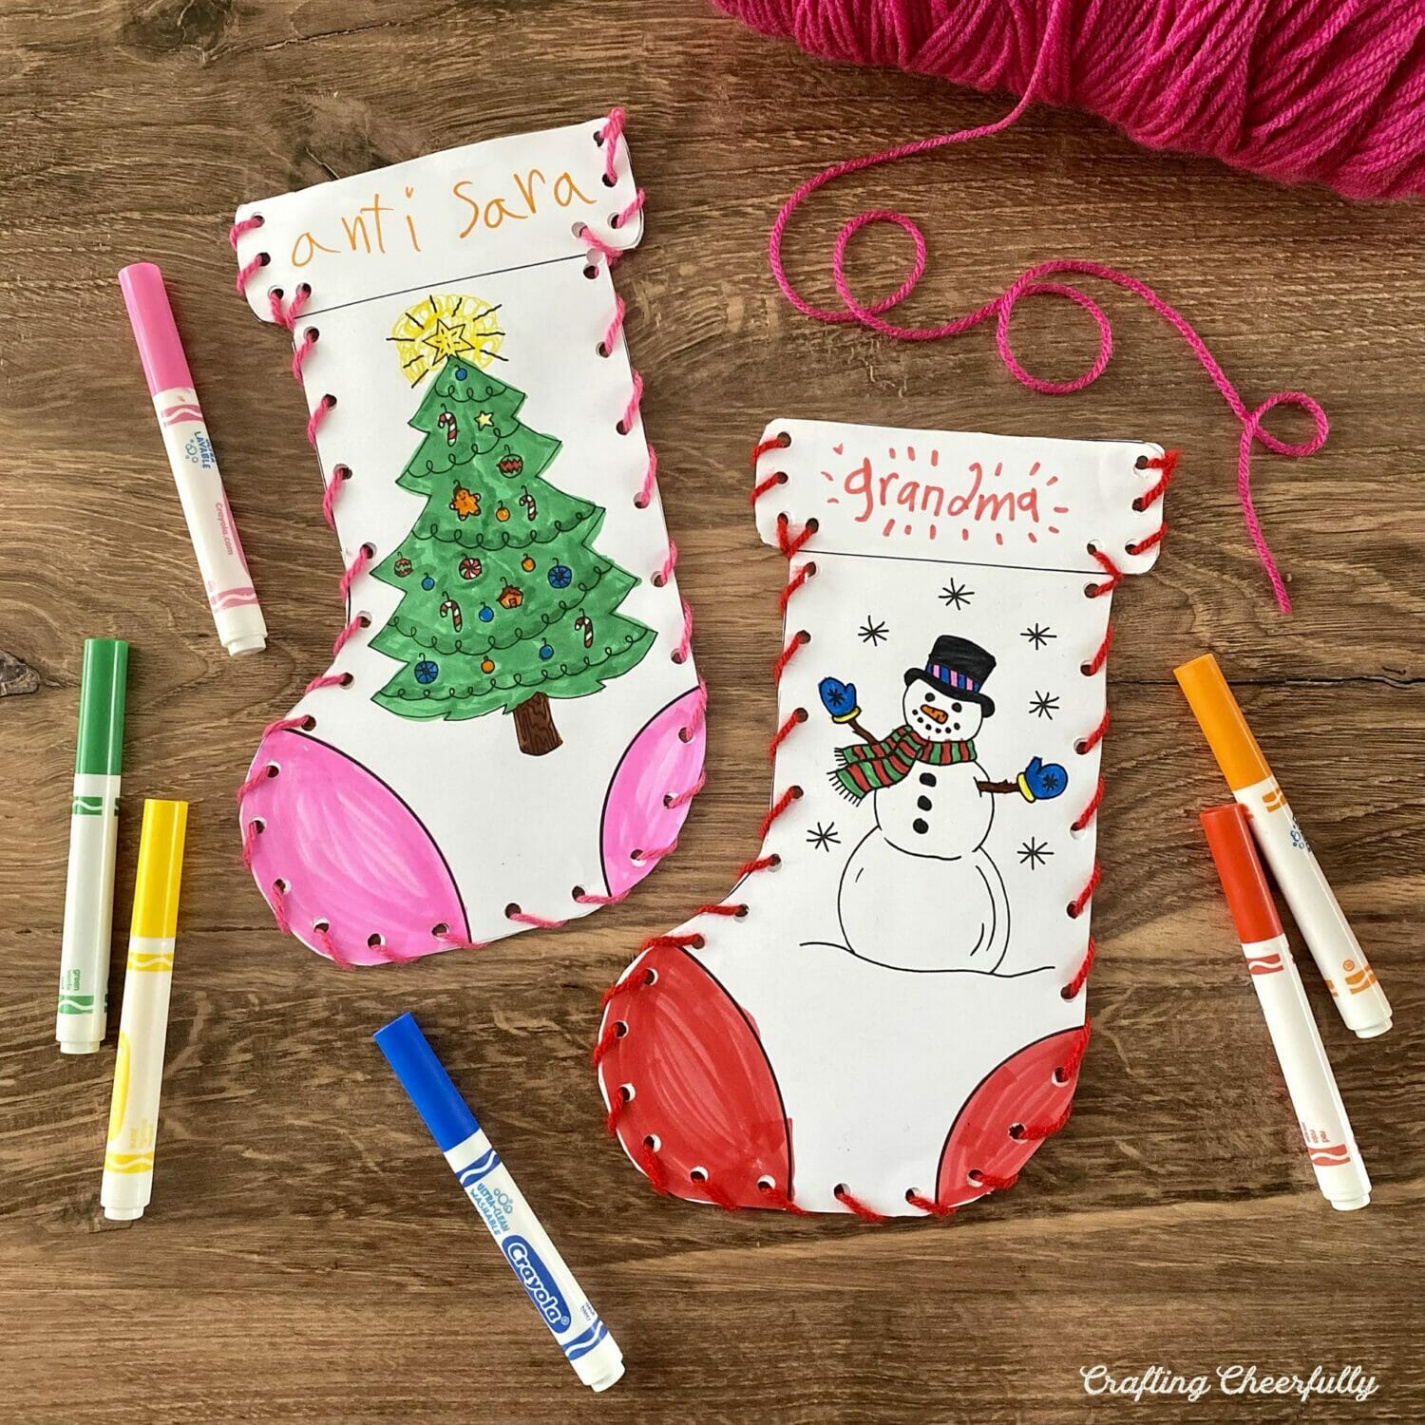 Christmas Stocking Craft for Kids - Crafting Cheerfully